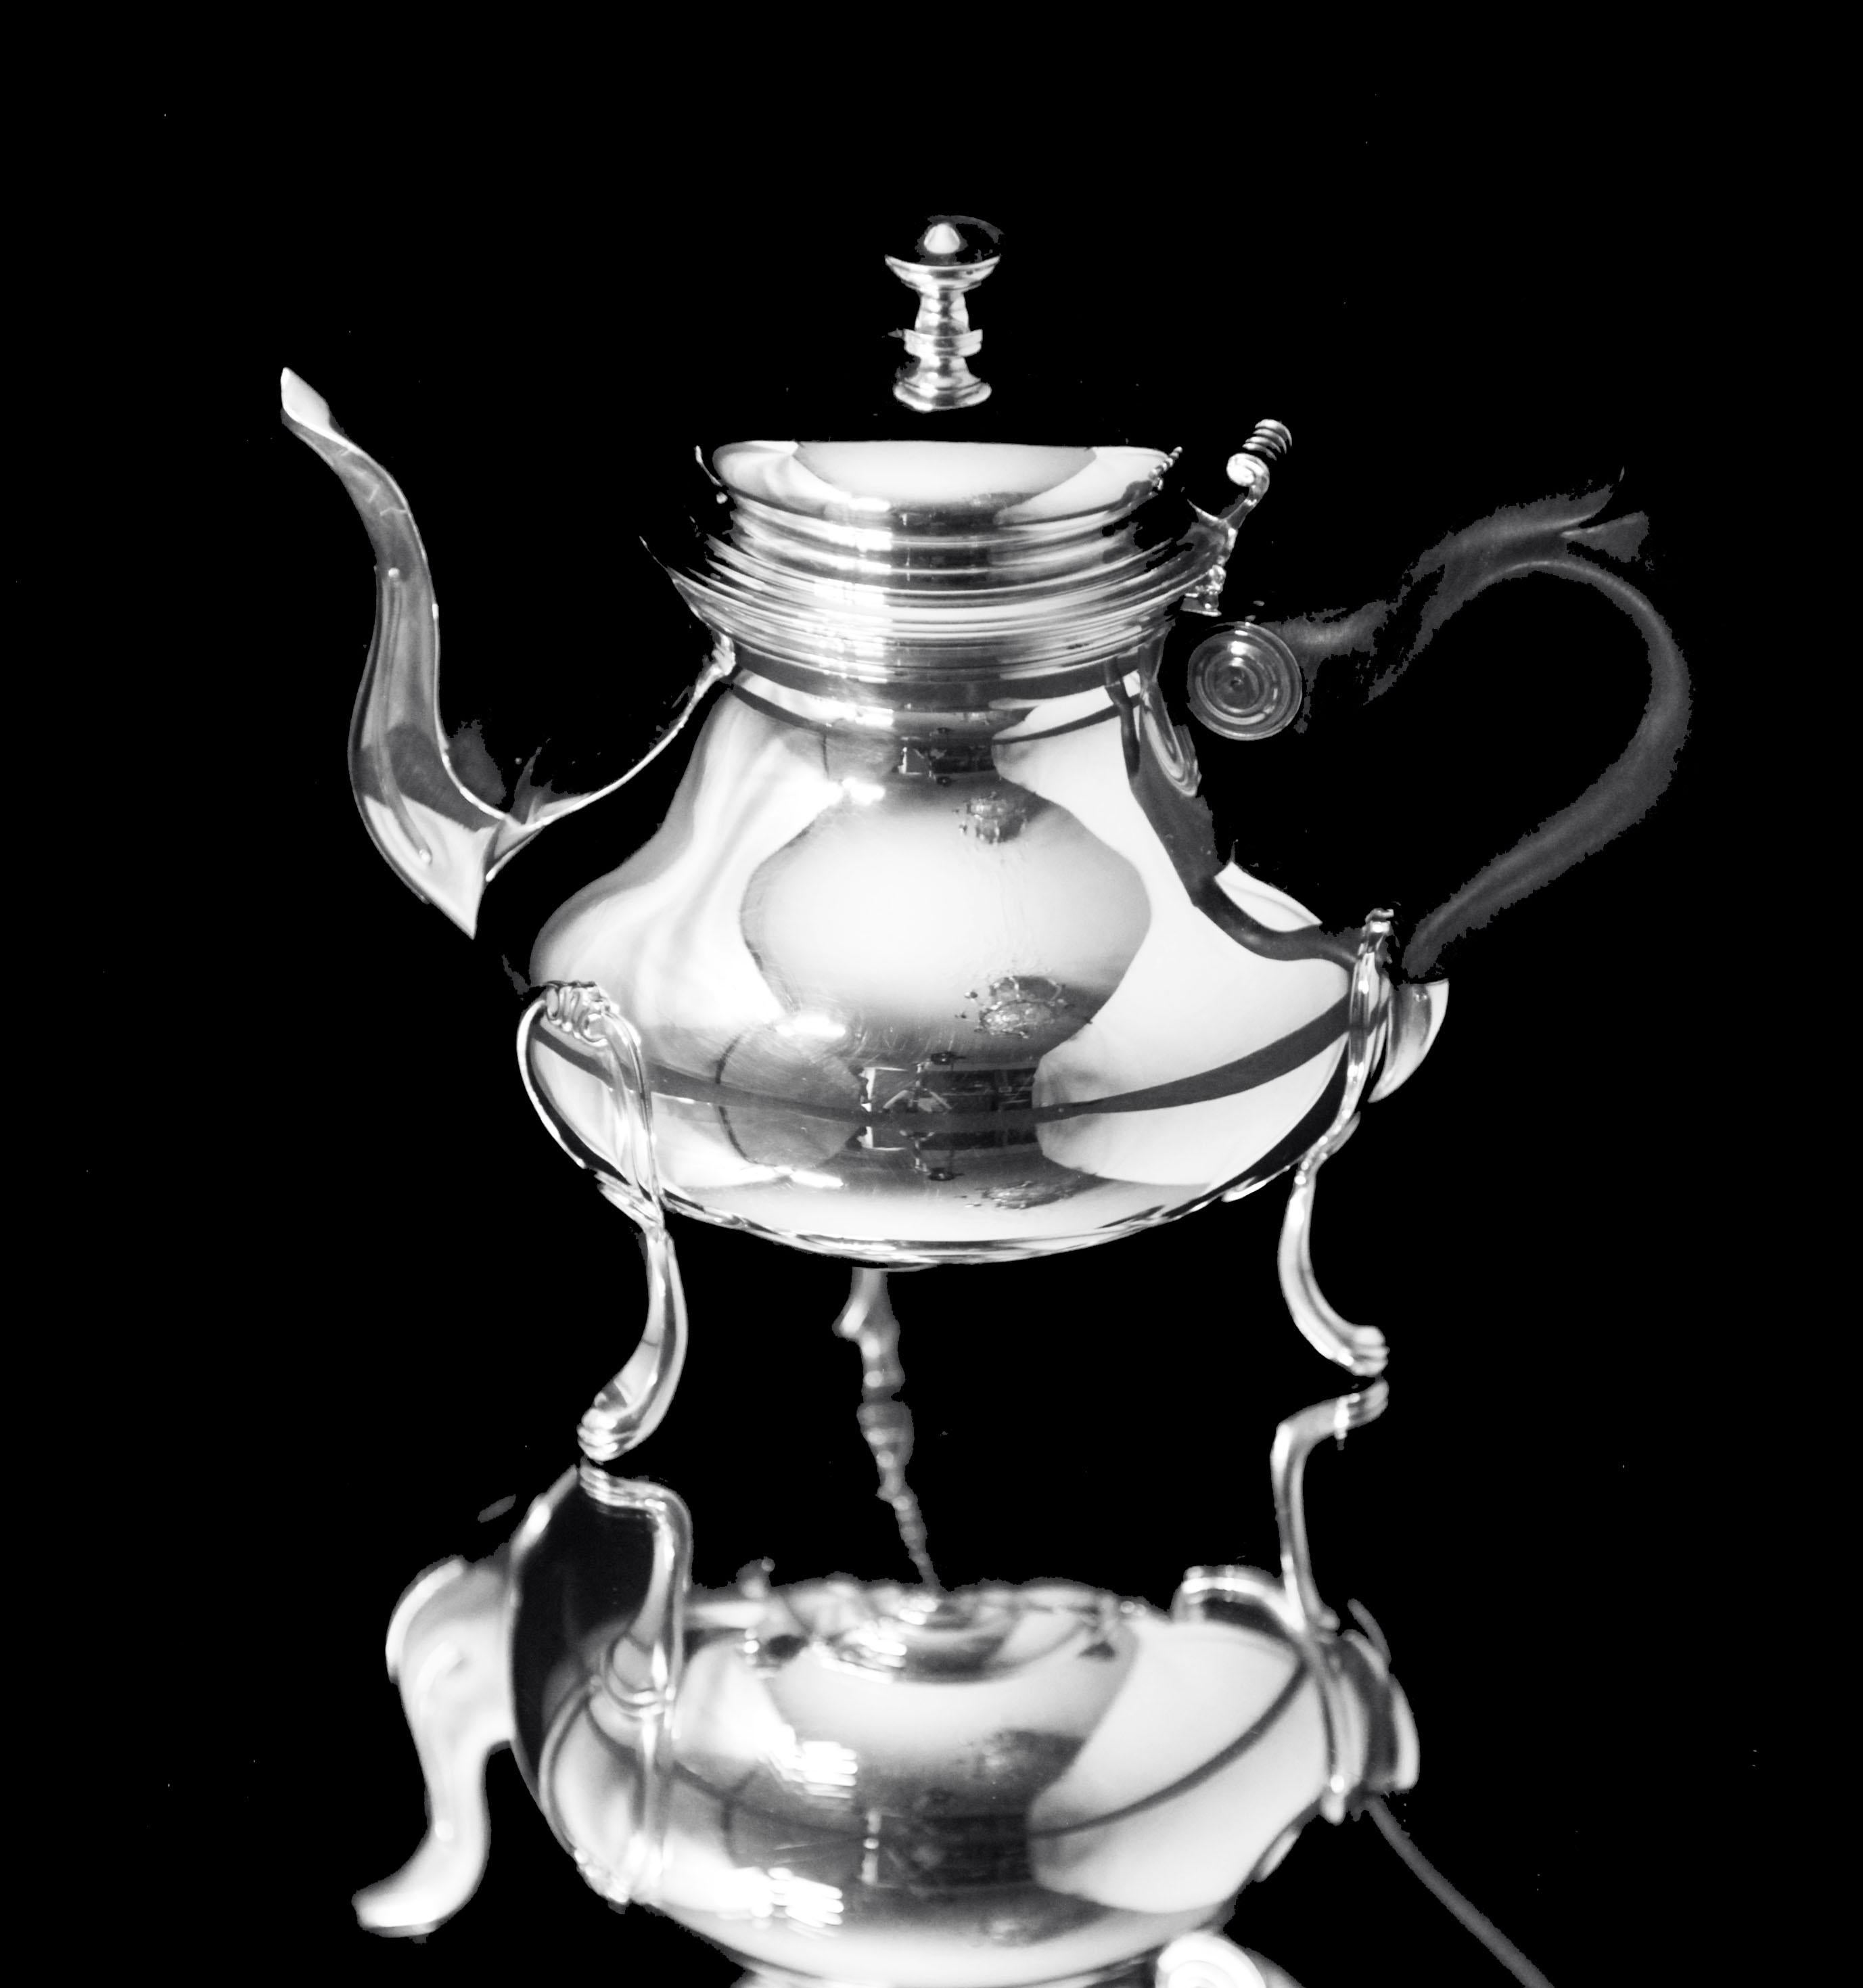 sterling silver tea sets with tray